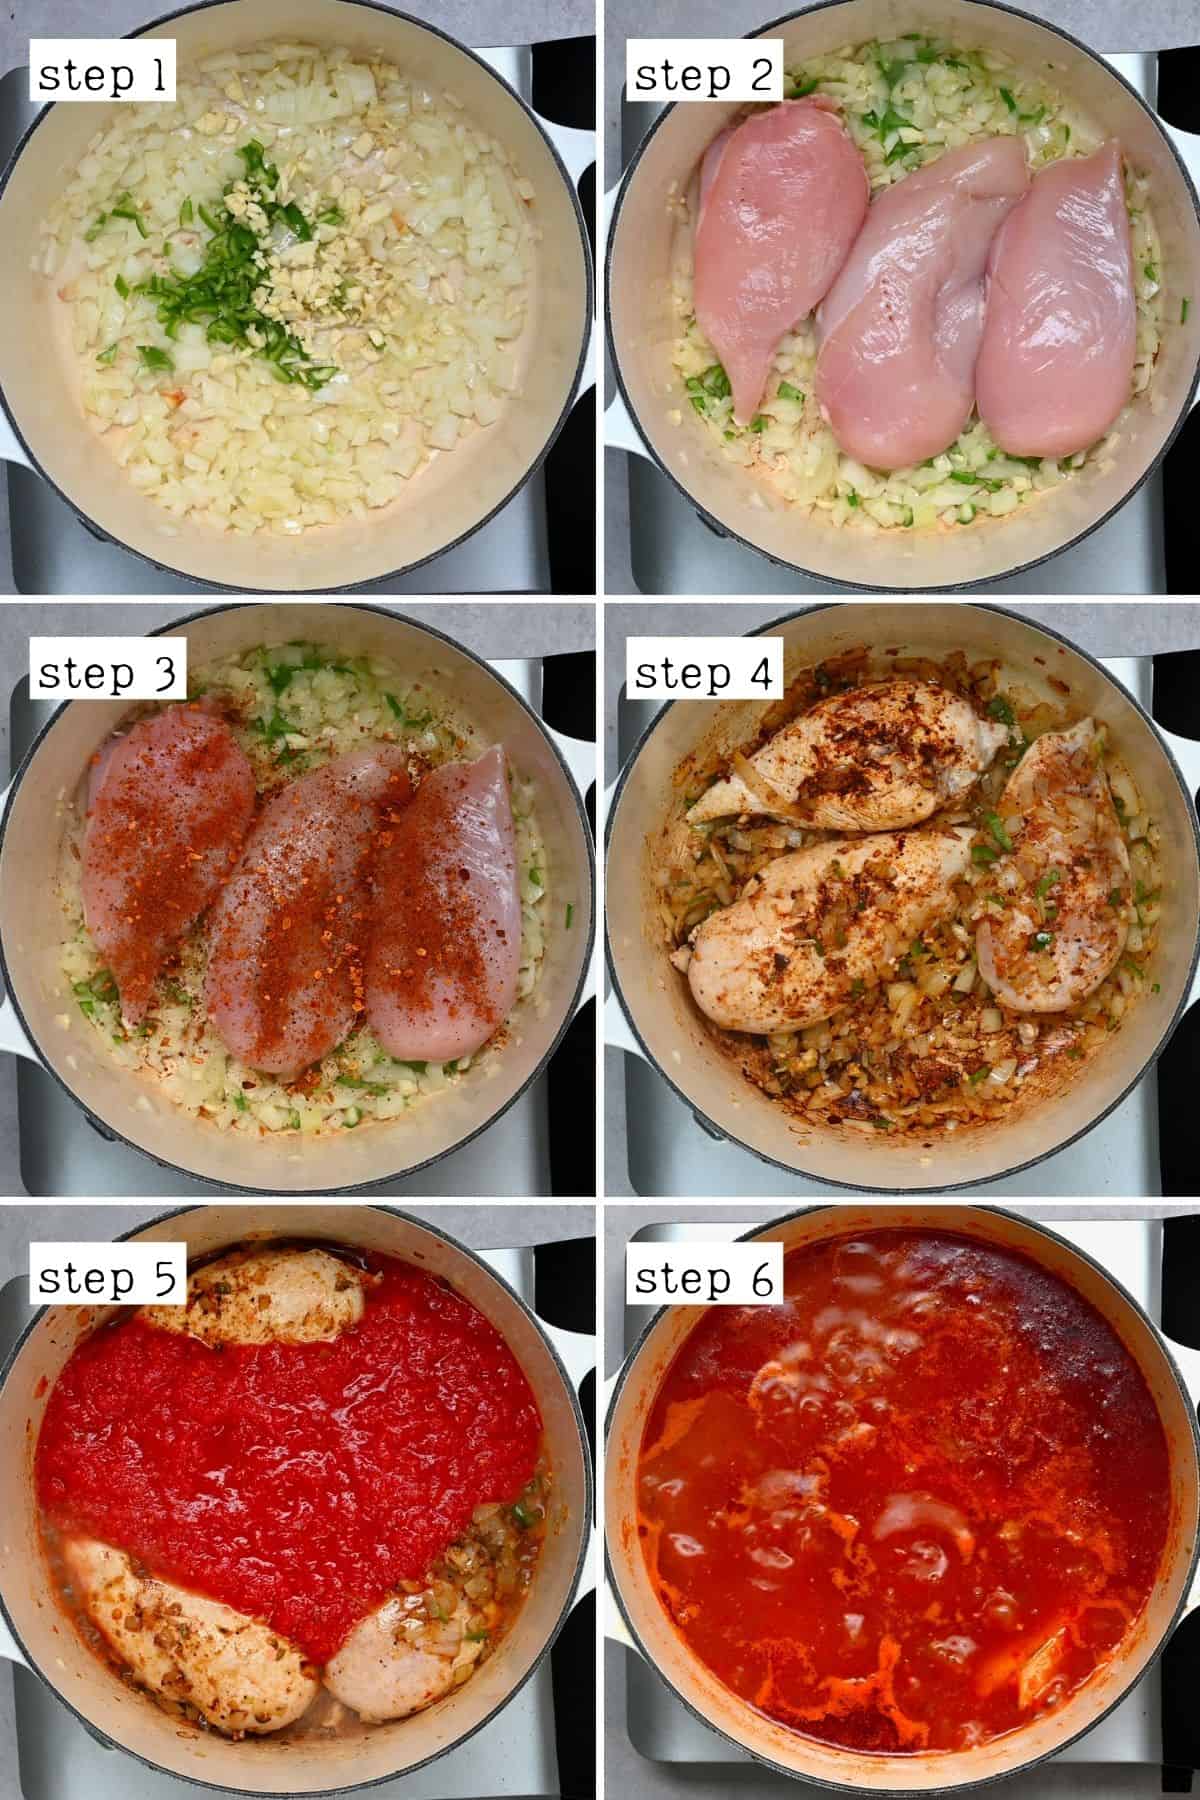 Steps for cooking chicken in tomato sauce